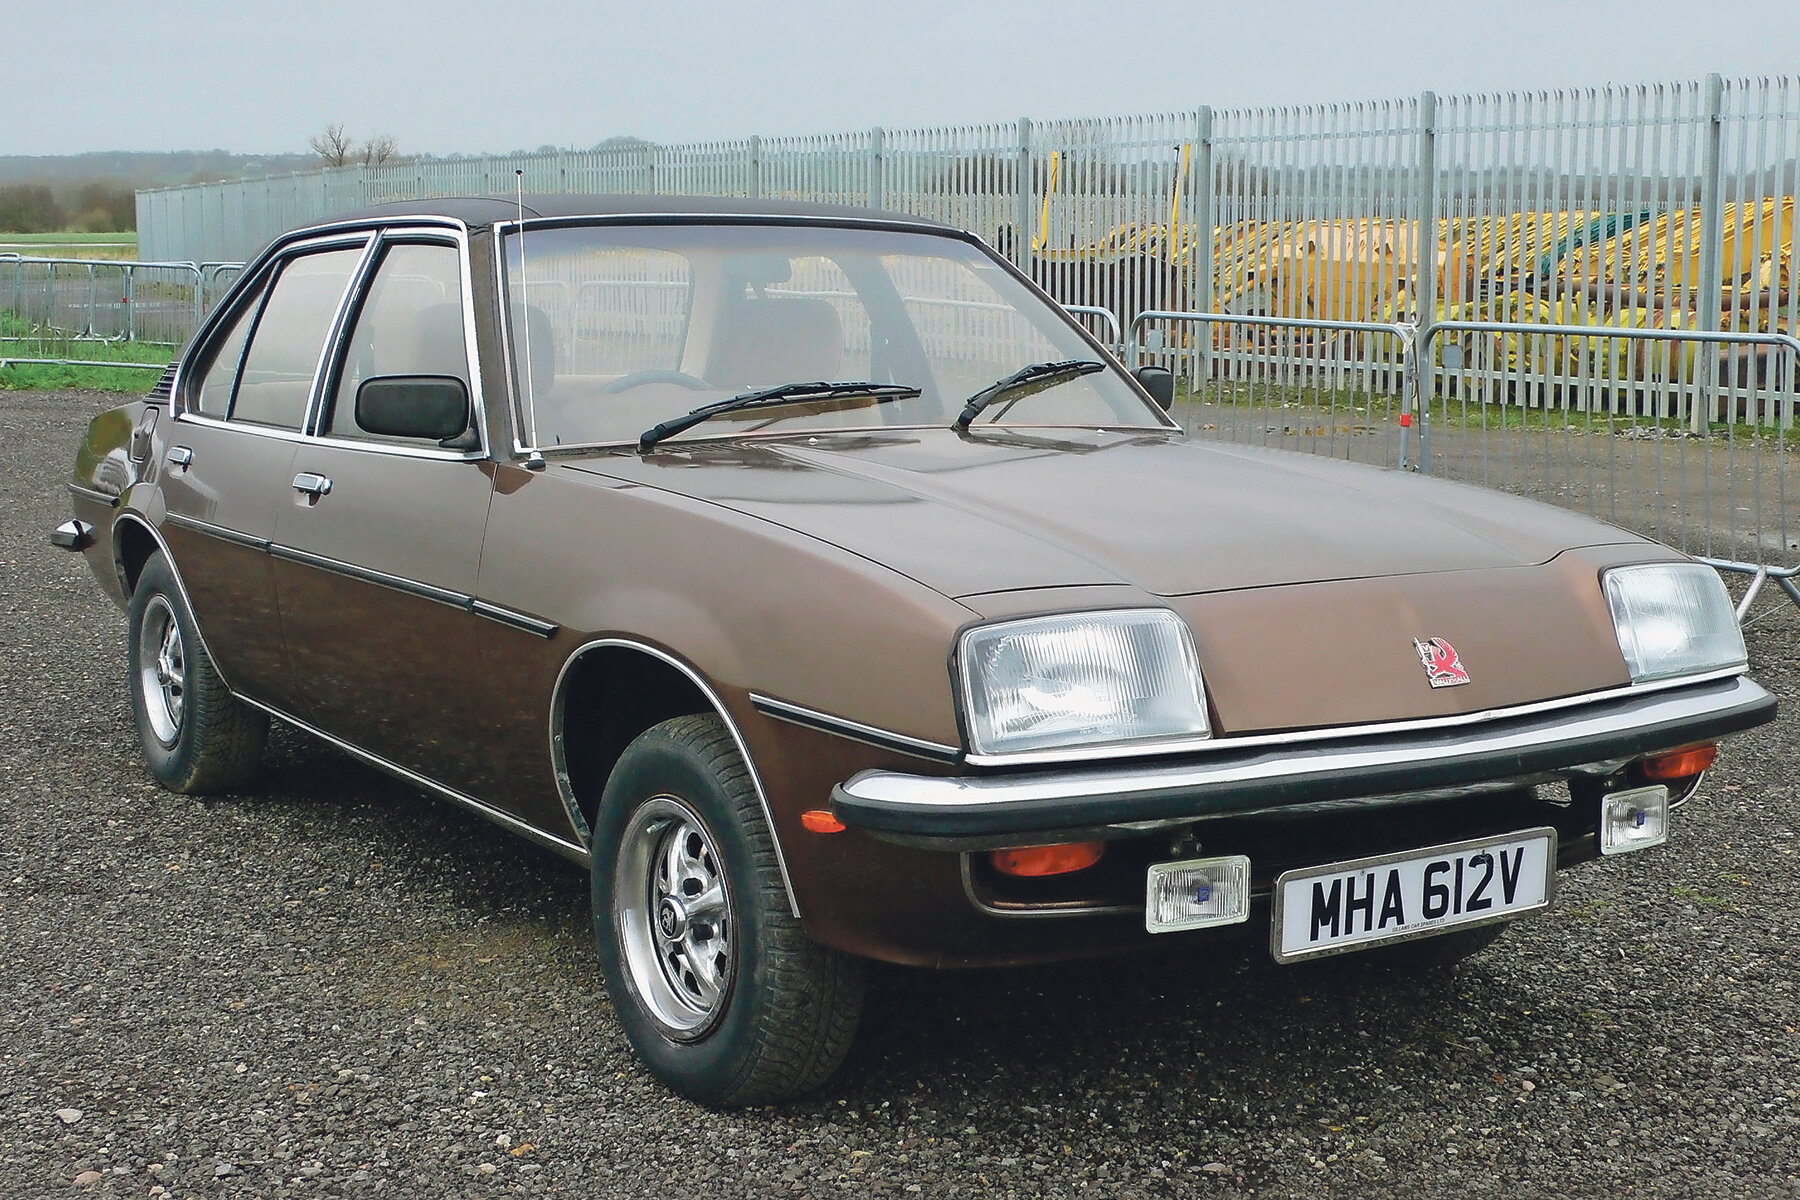 1980 Vauxhall Cavalier was an absolute steal at auction